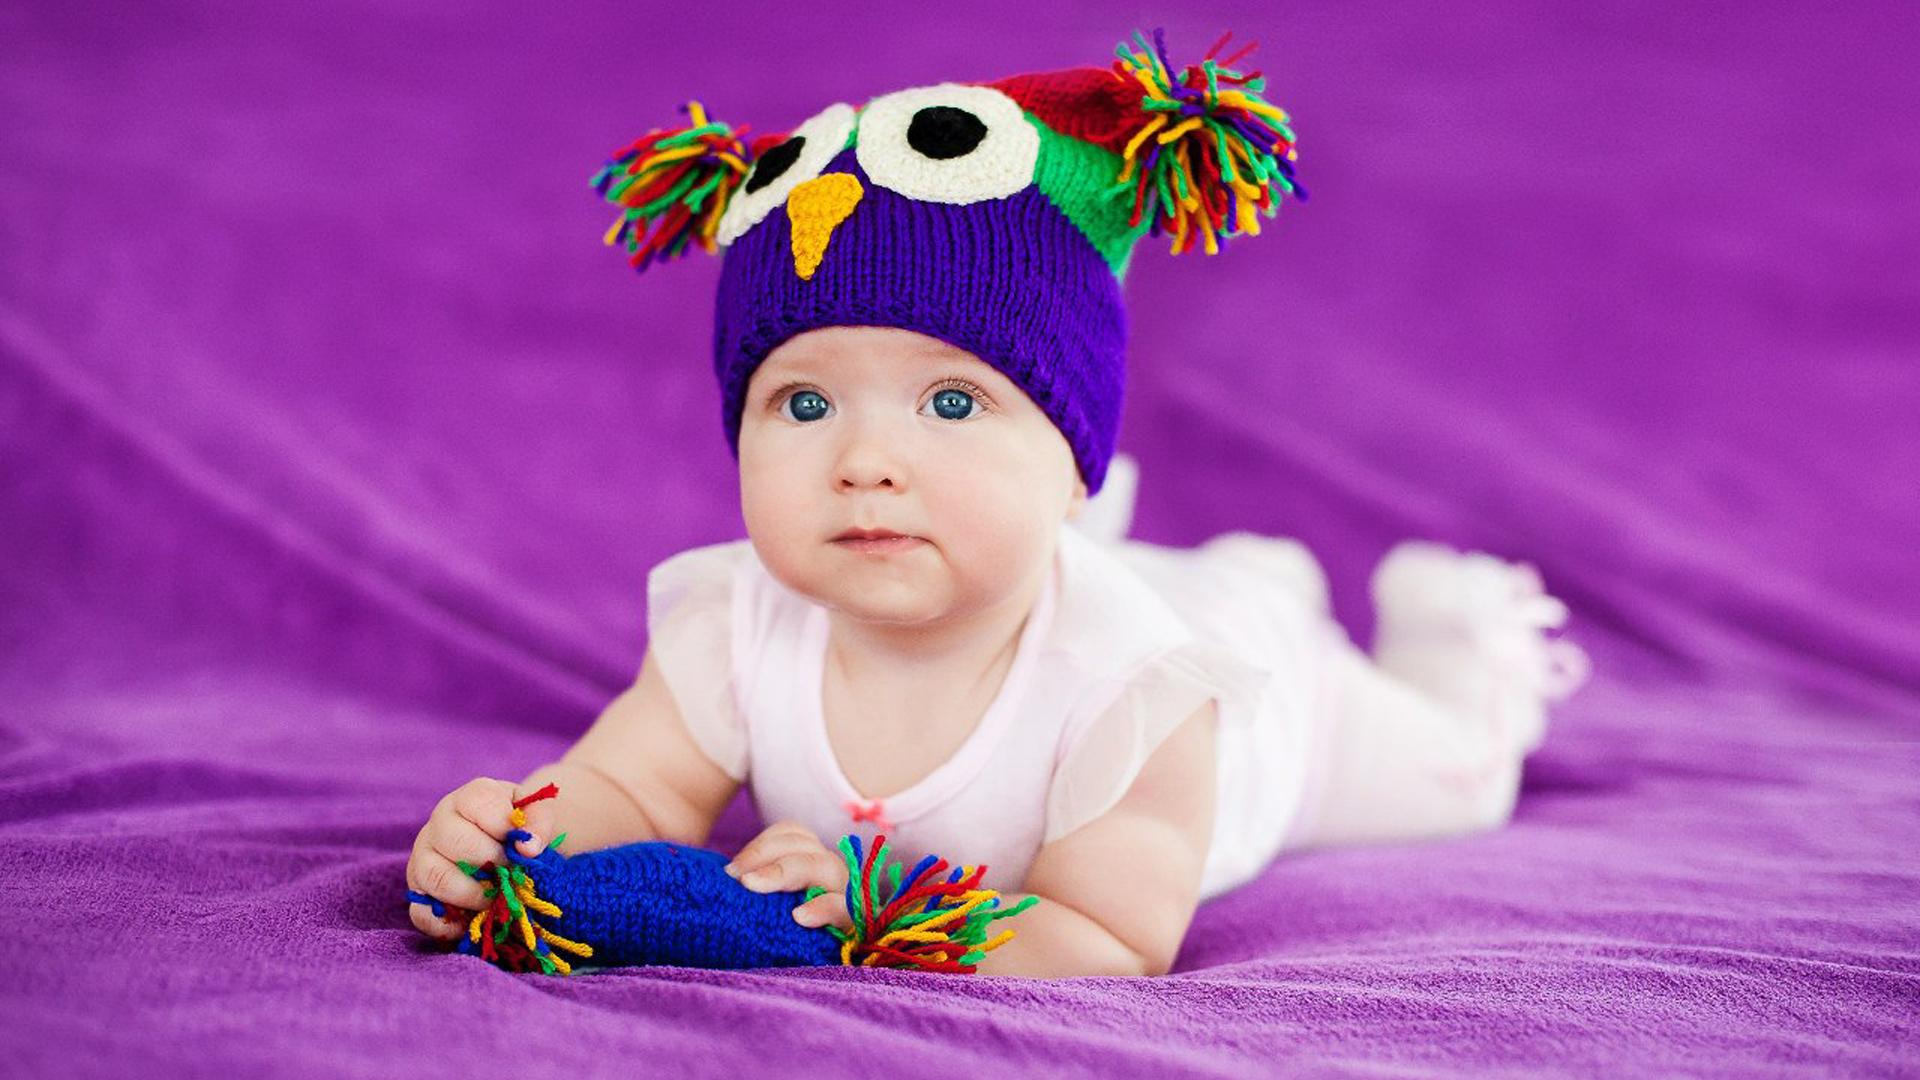 Girl Baby Is Lying Down On Soft Purple Cloth Wearing White Dress And Colorful Woolen Knitted Cap HD